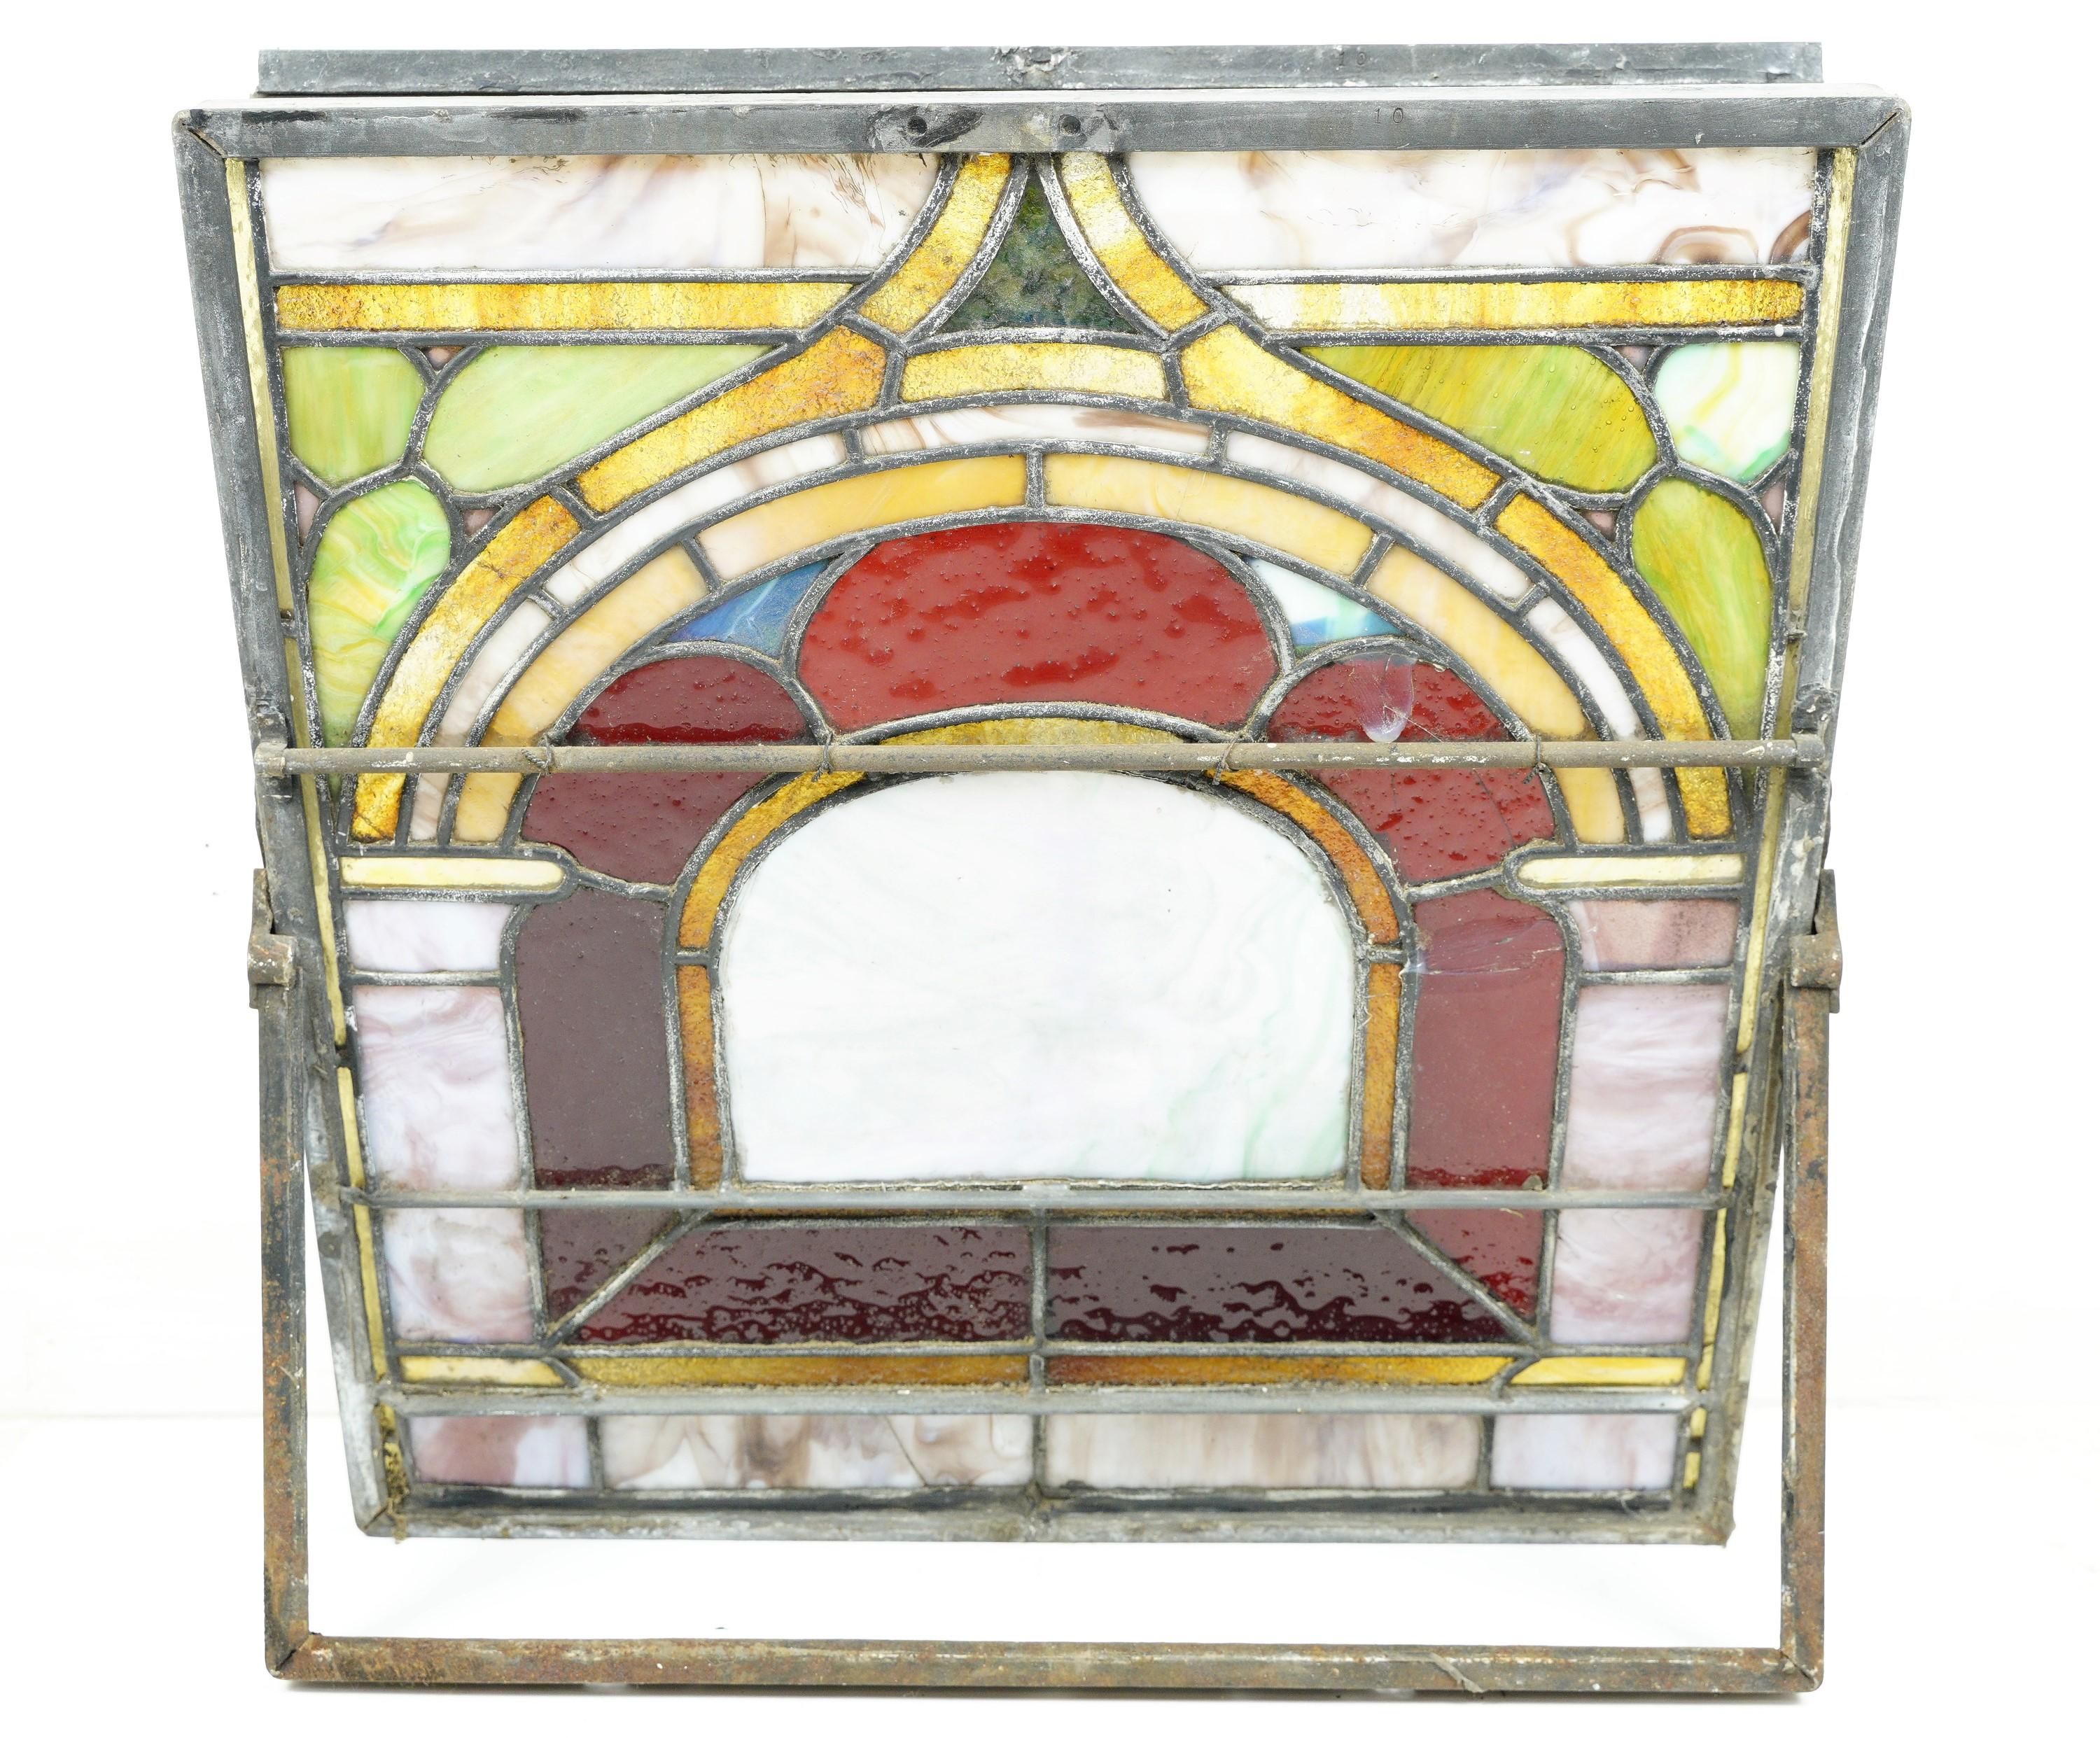 Rescued 2 Foot Square Arched Stained Glass Window 10